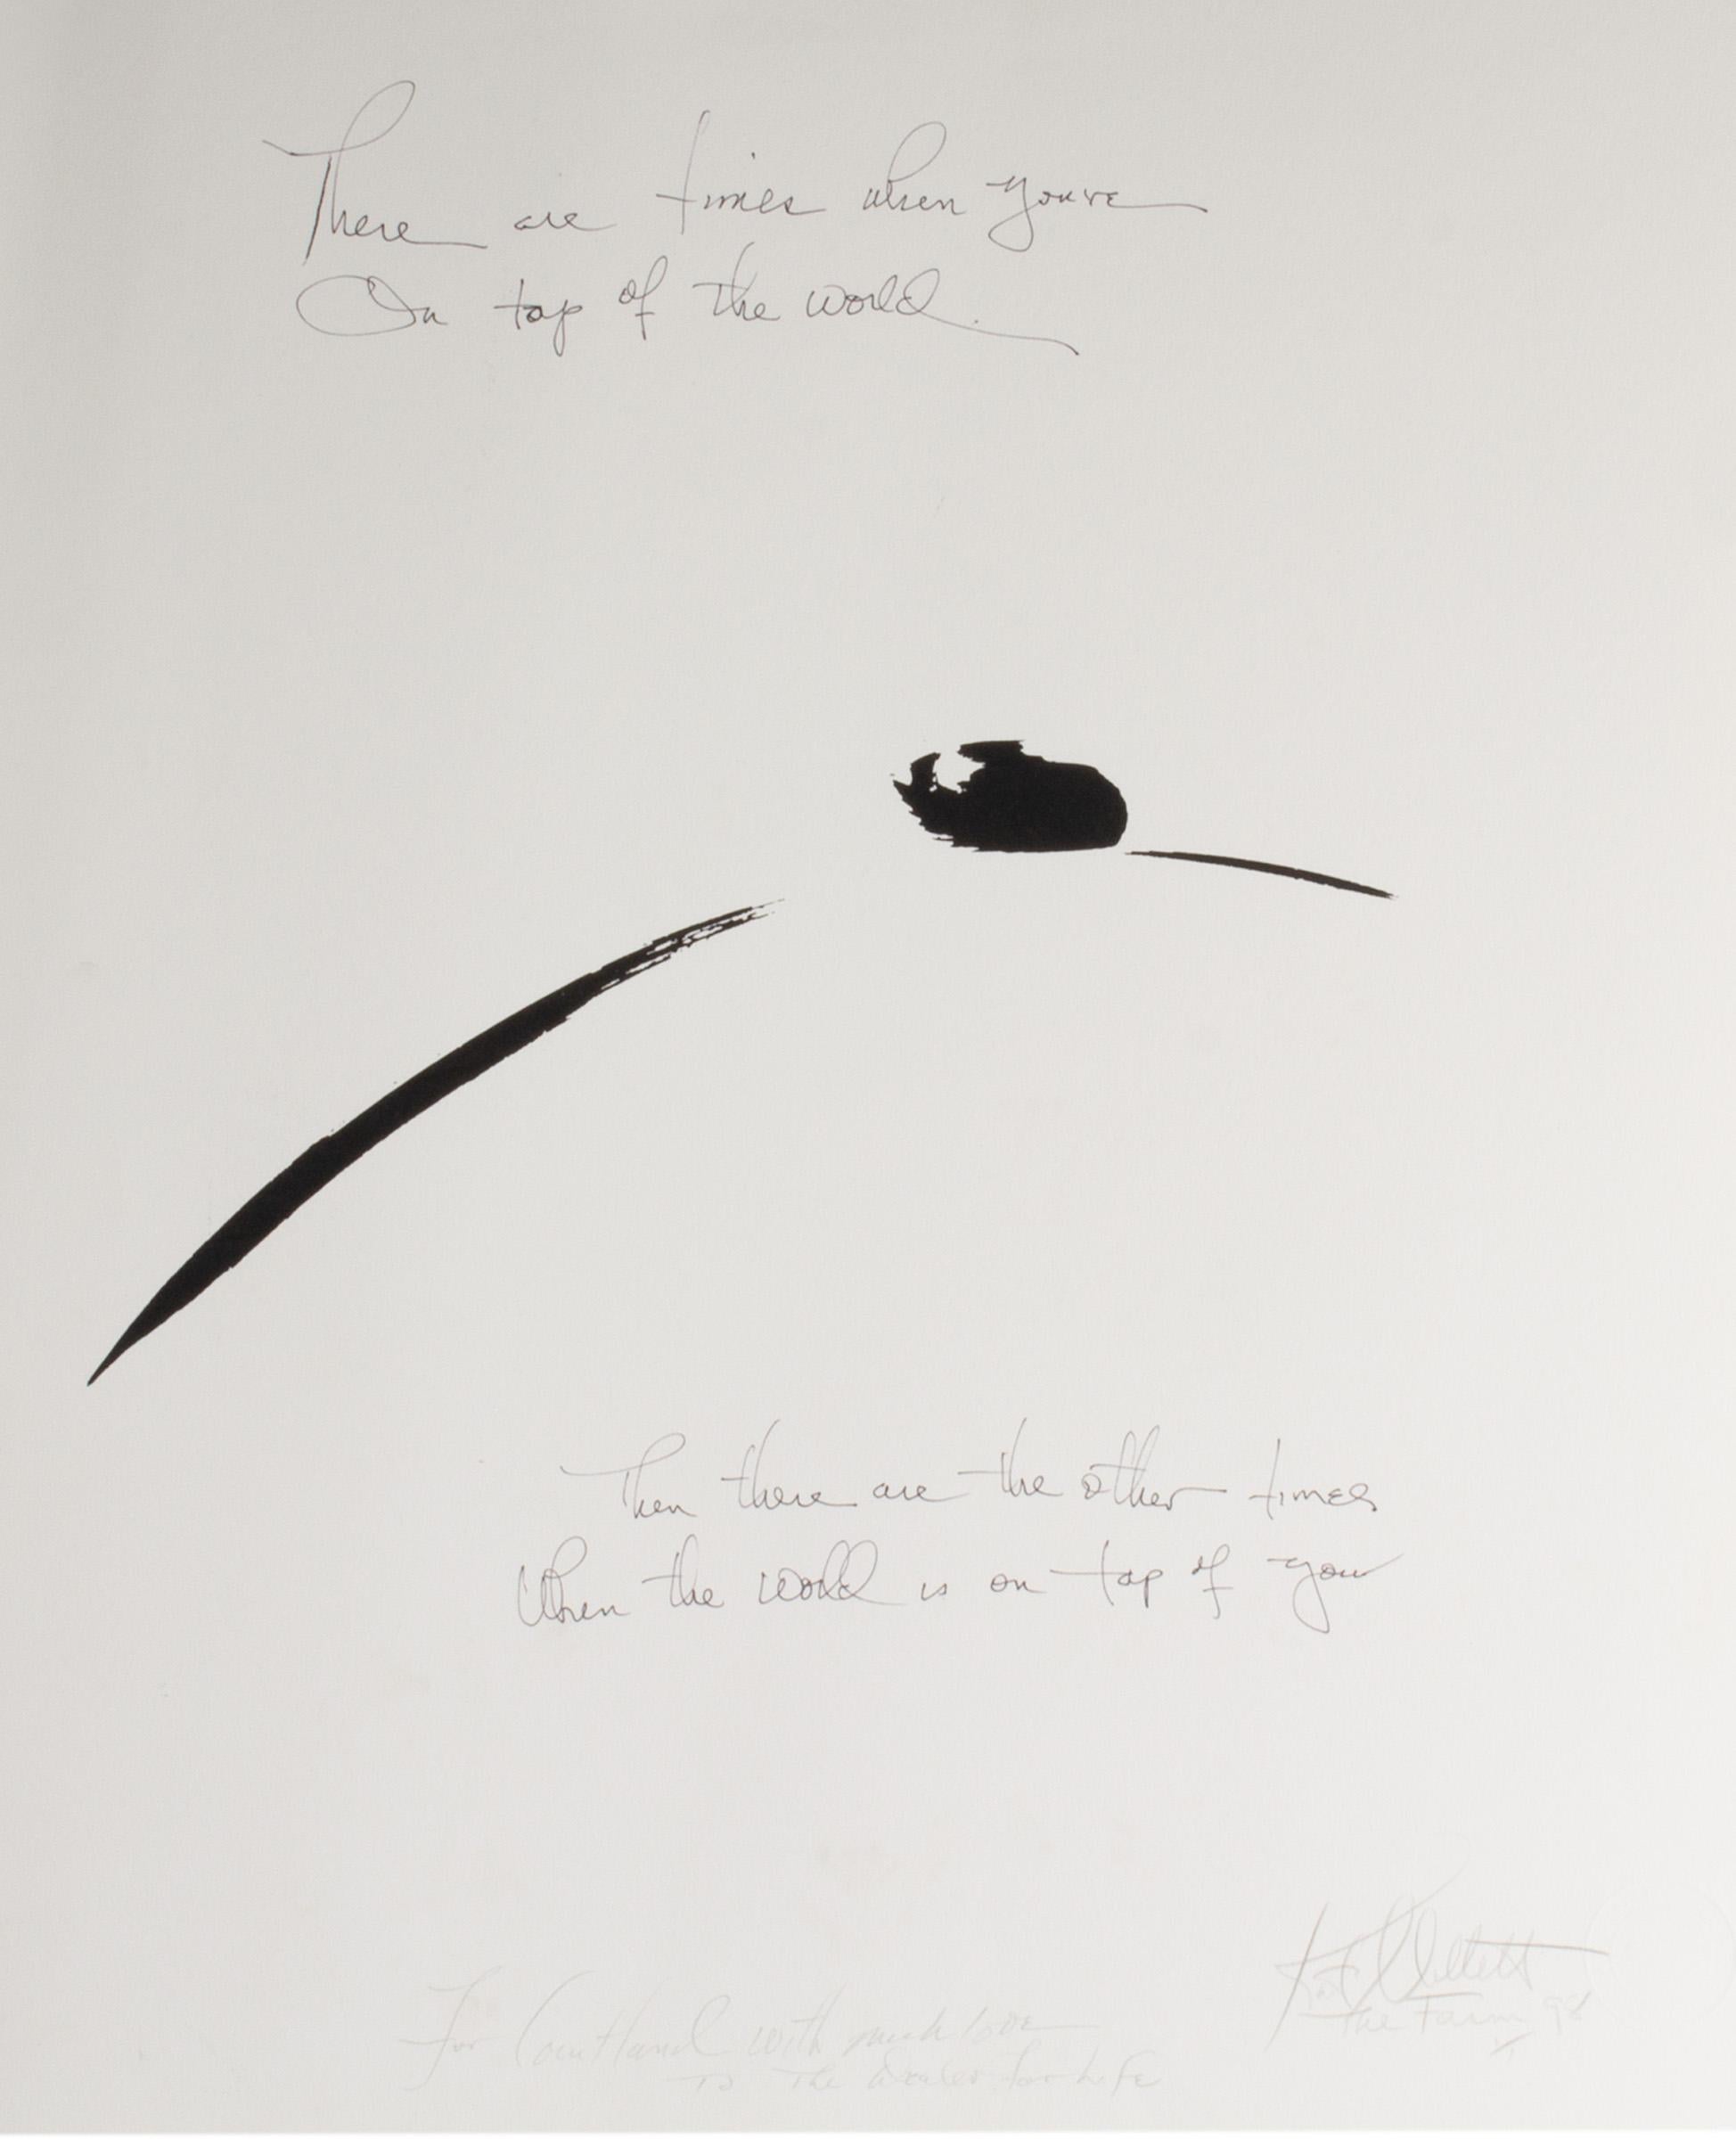 A 1998 signed lithograph on paper by American feminist writer, theorist, artist and academic, Kate Millett (1934 - 2017). This work uses a painterly style to depict an abstracted and minimal breast. At the top center, a poem is written across the